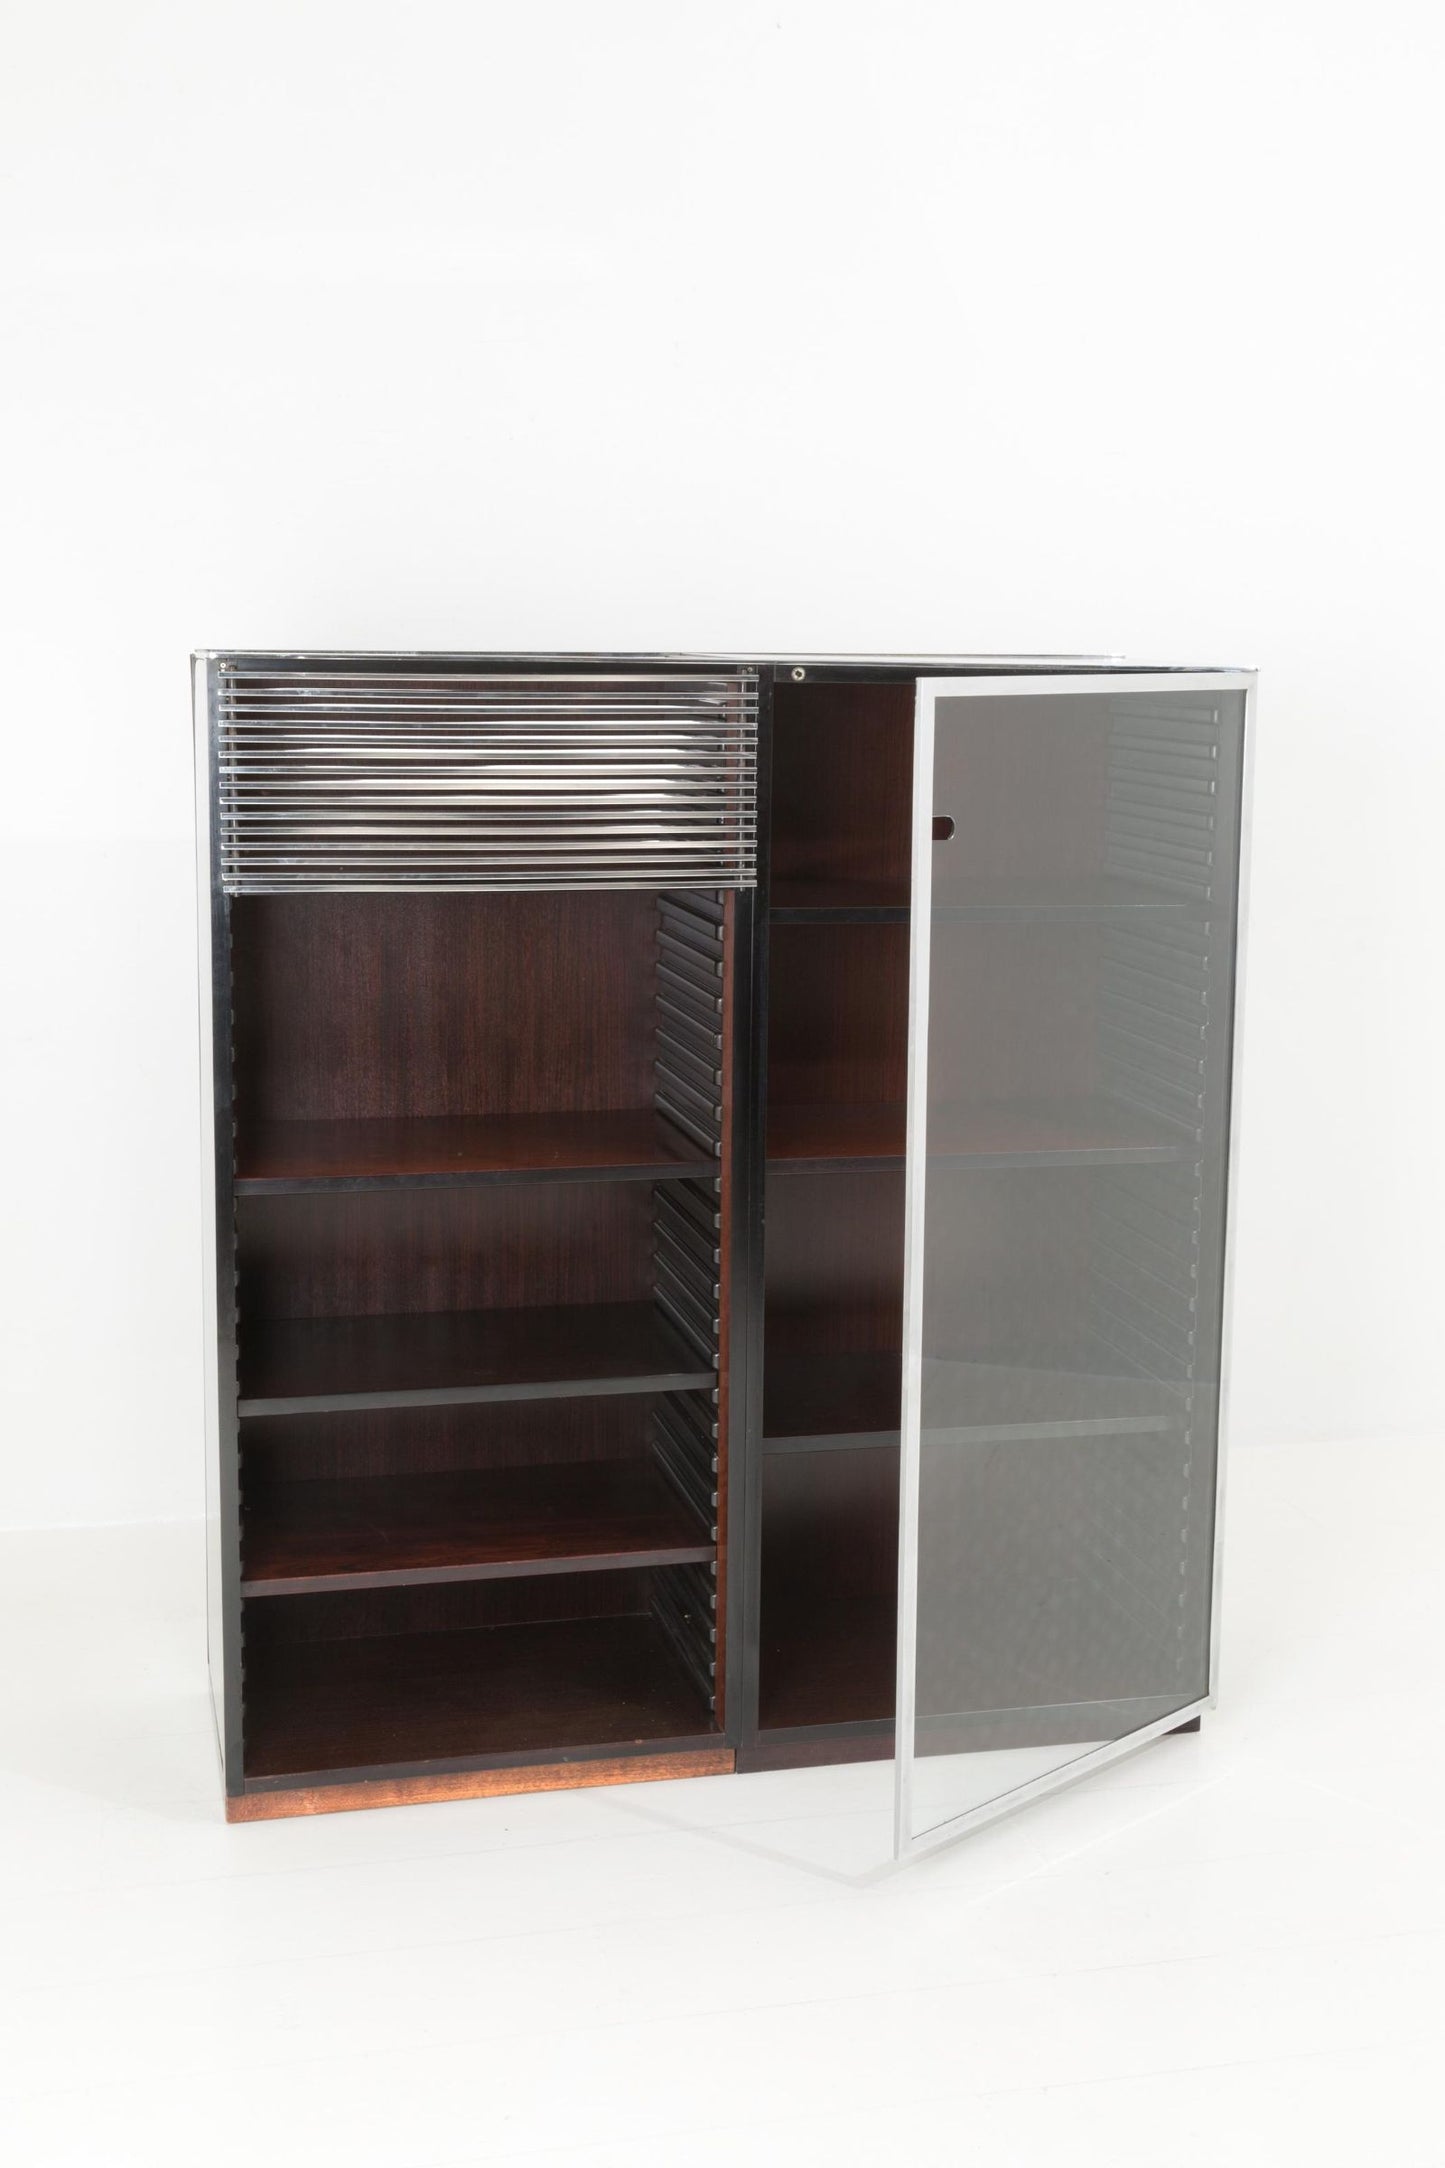 Showcase in wood, chromed steel and glass. '70s